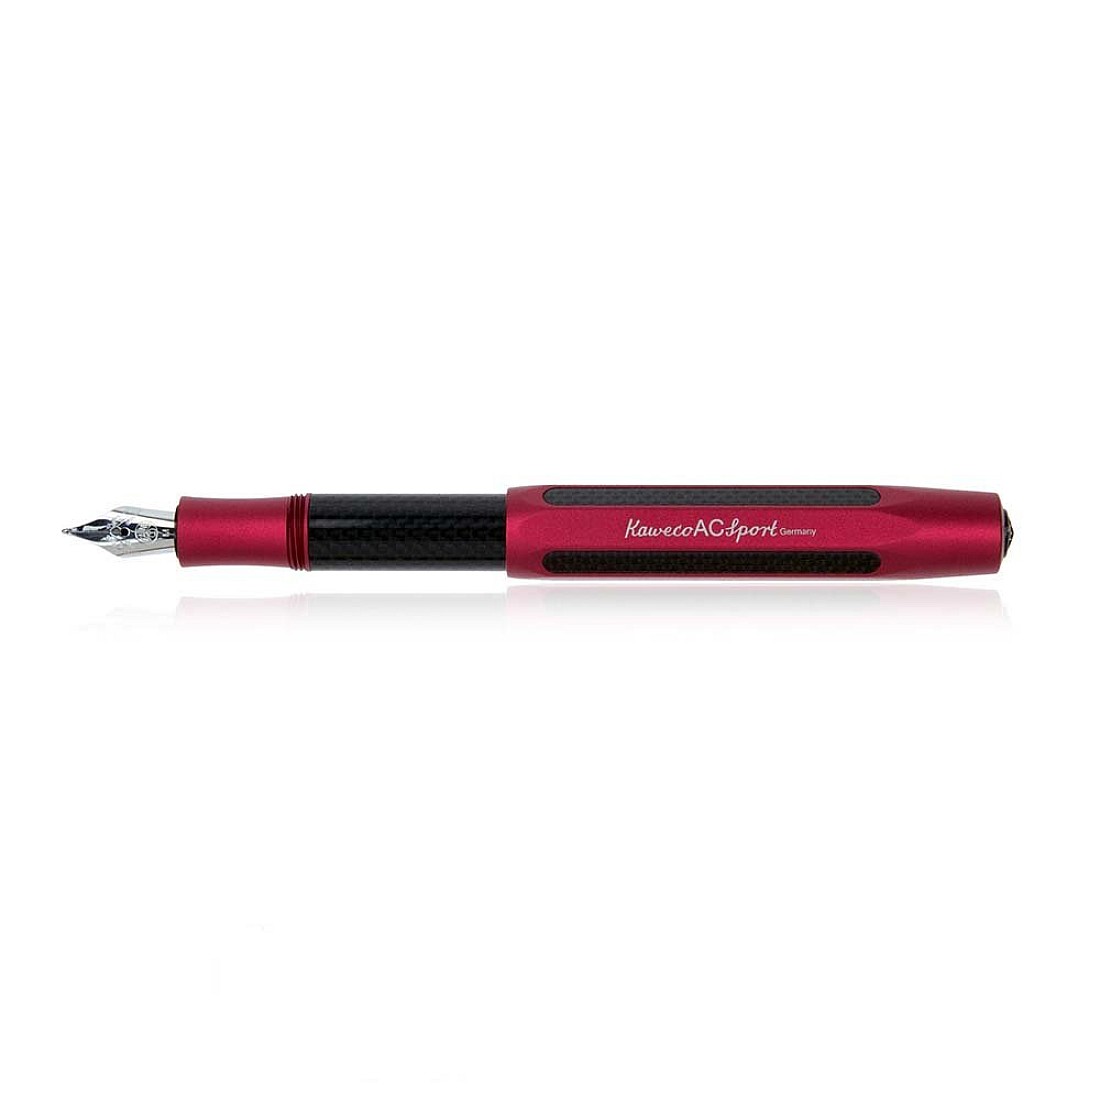 New in Box 10000357 Fine Point Kaweco AC Sport Fountain Pen Carbon Red 